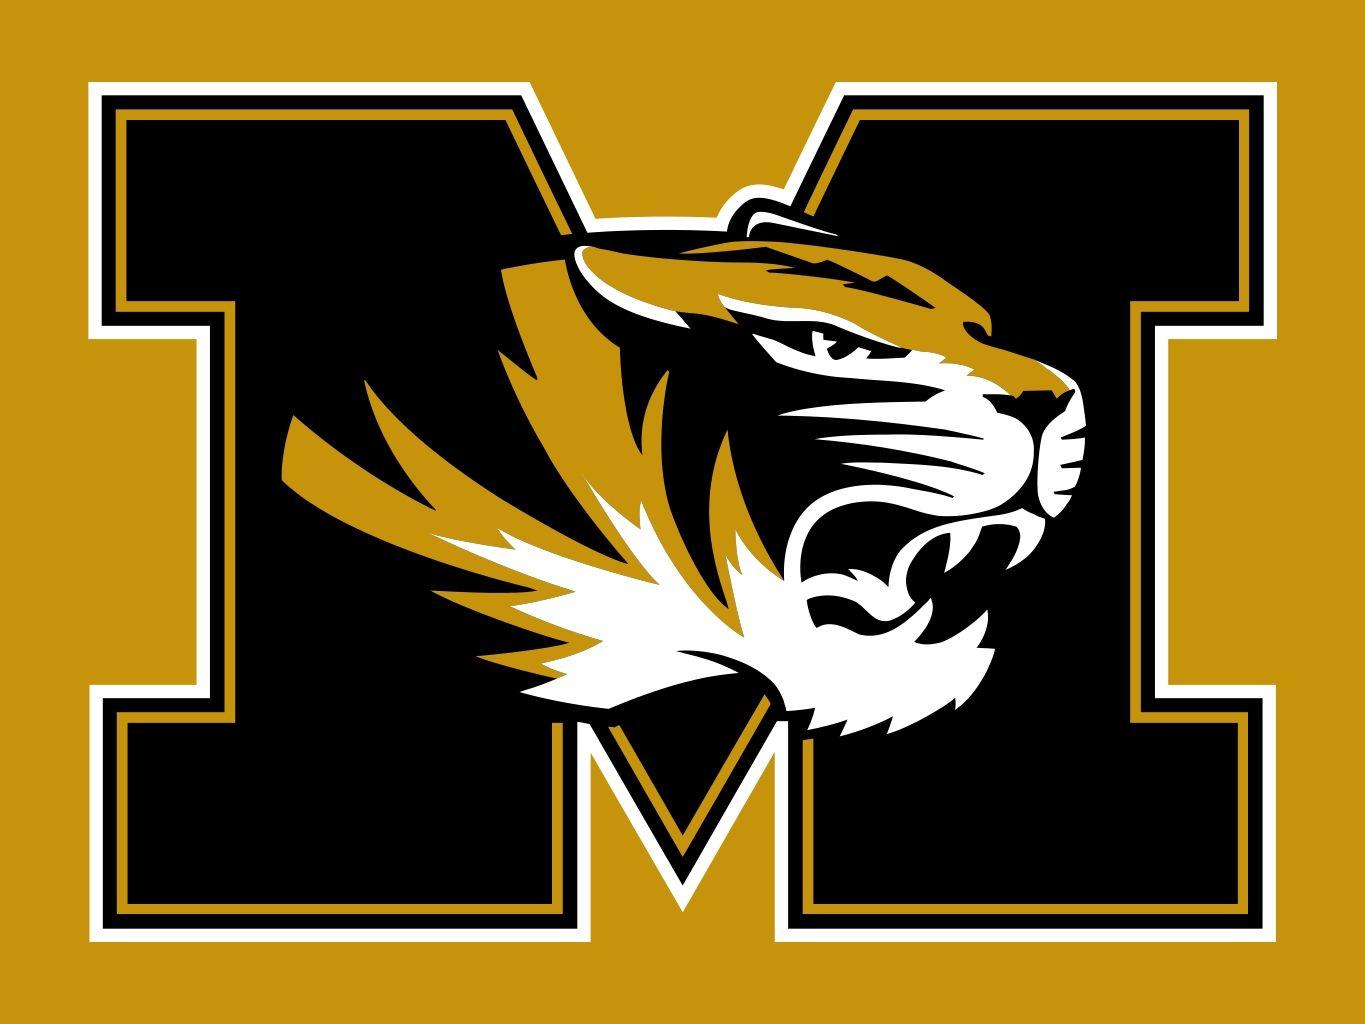 Missouri Tigers Logo - The block M emblazoned with a tiger is the symbol for